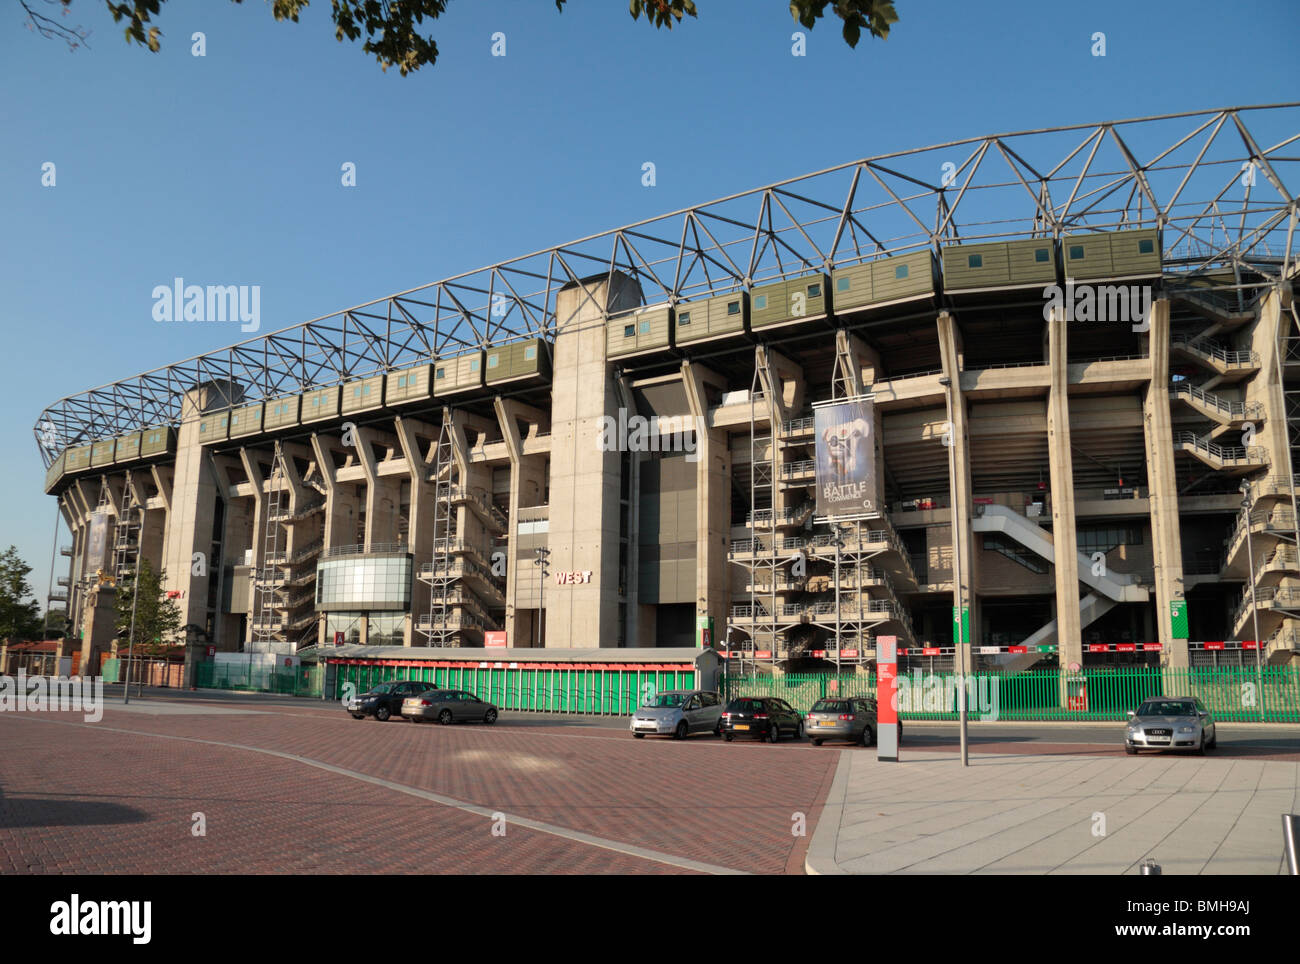 The West Stand of Twickenham Rugby Stadium, home of English International rugby, in south west London, UK.. August 2009. Stock Photo